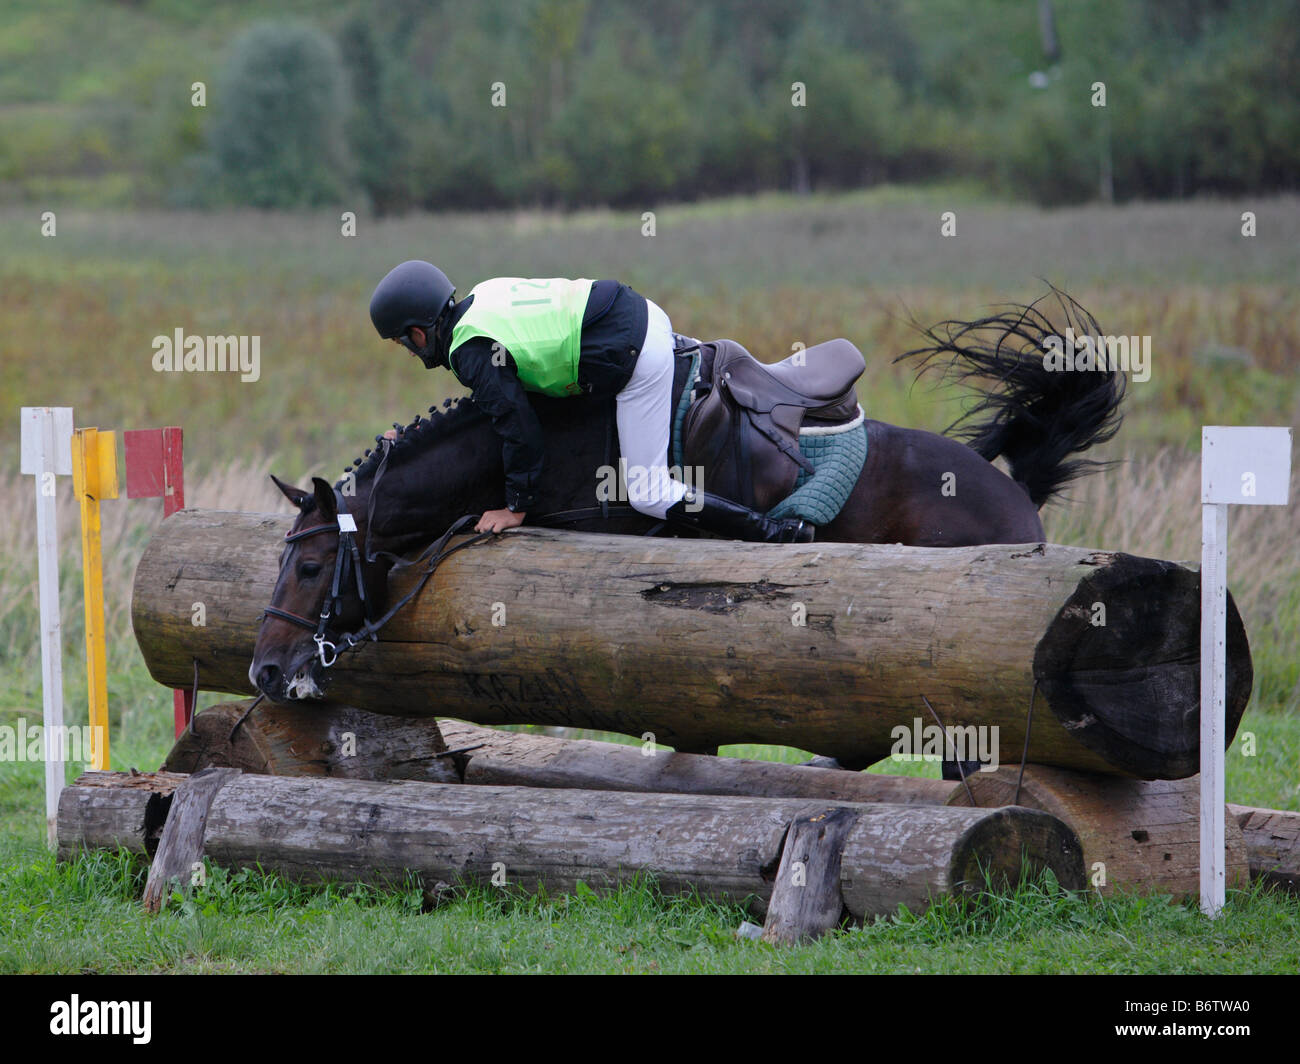 Rider falls from horse rearing up at Moscow horse trials Stock Photo